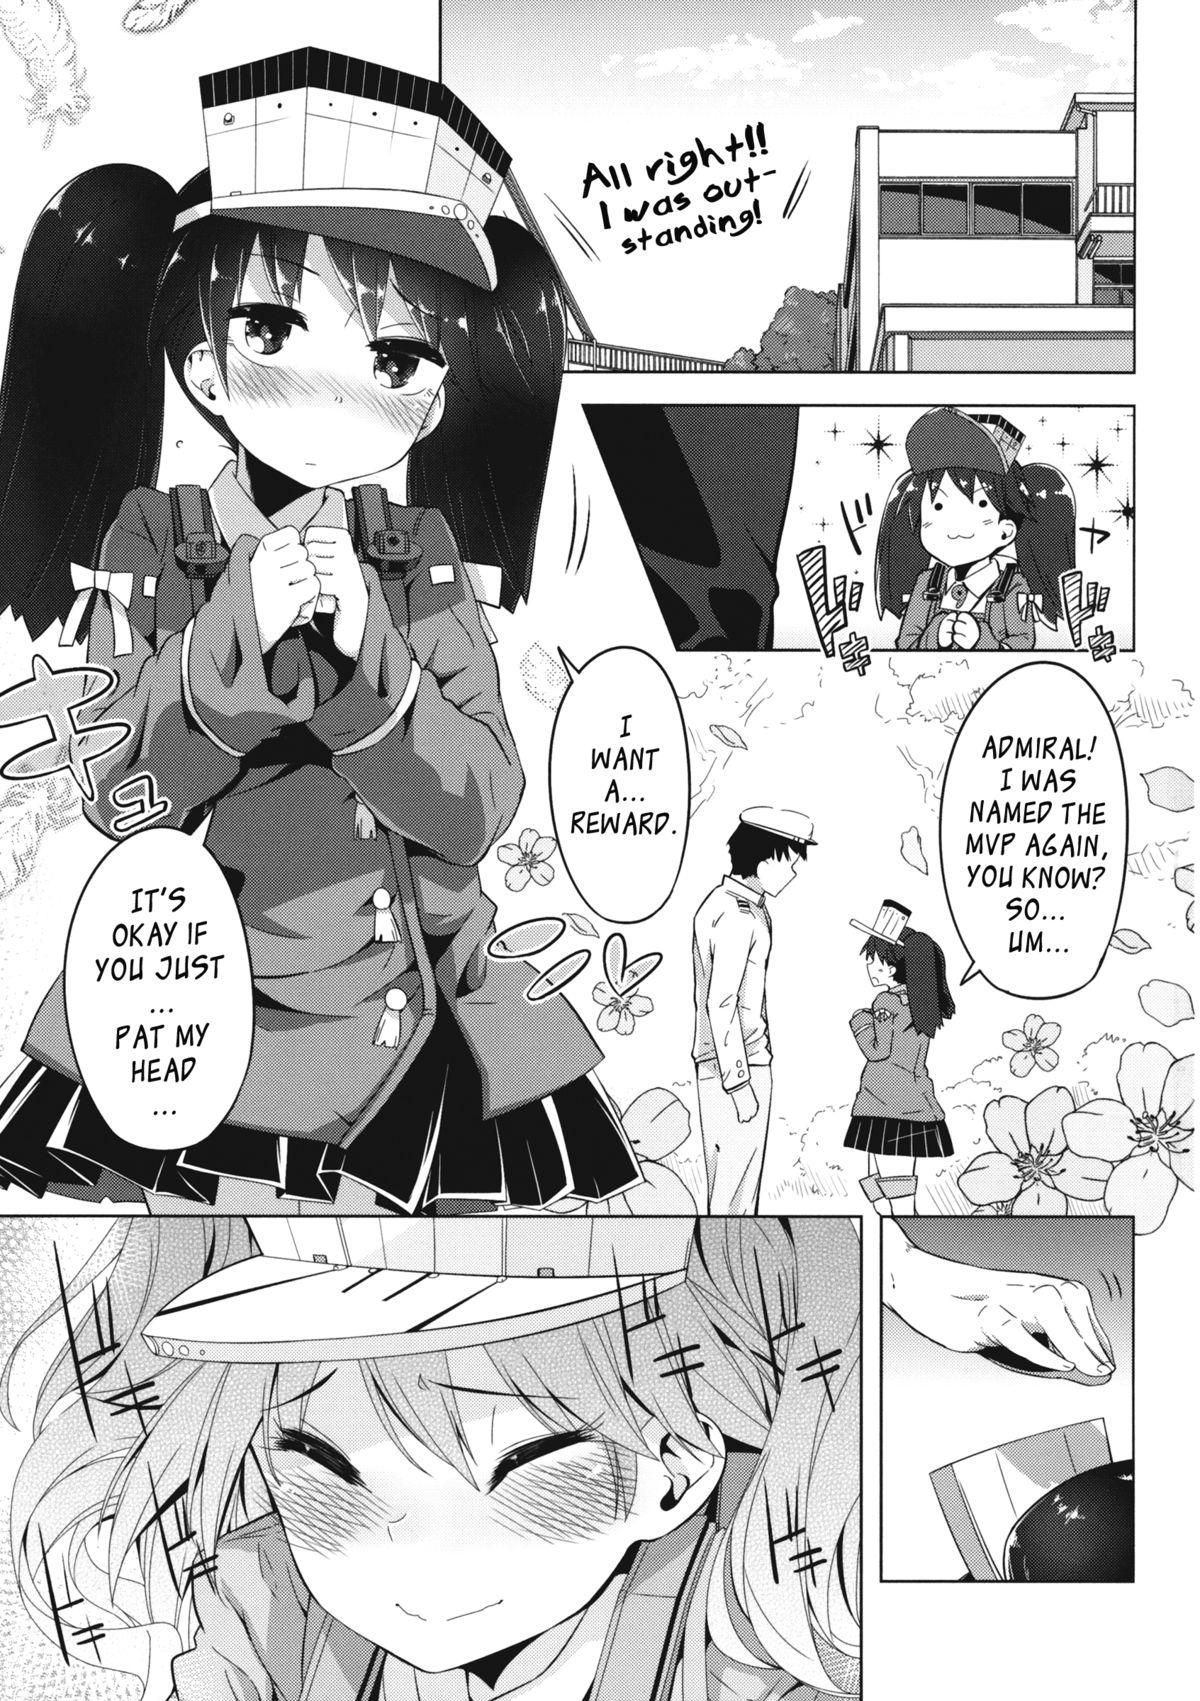 Gaysex Koi suru Otome no Miryoku wa Mune dake janai! | The Allure of a Maiden in Love isn't Only in Her Chest! - Kantai collection Students - Page 2